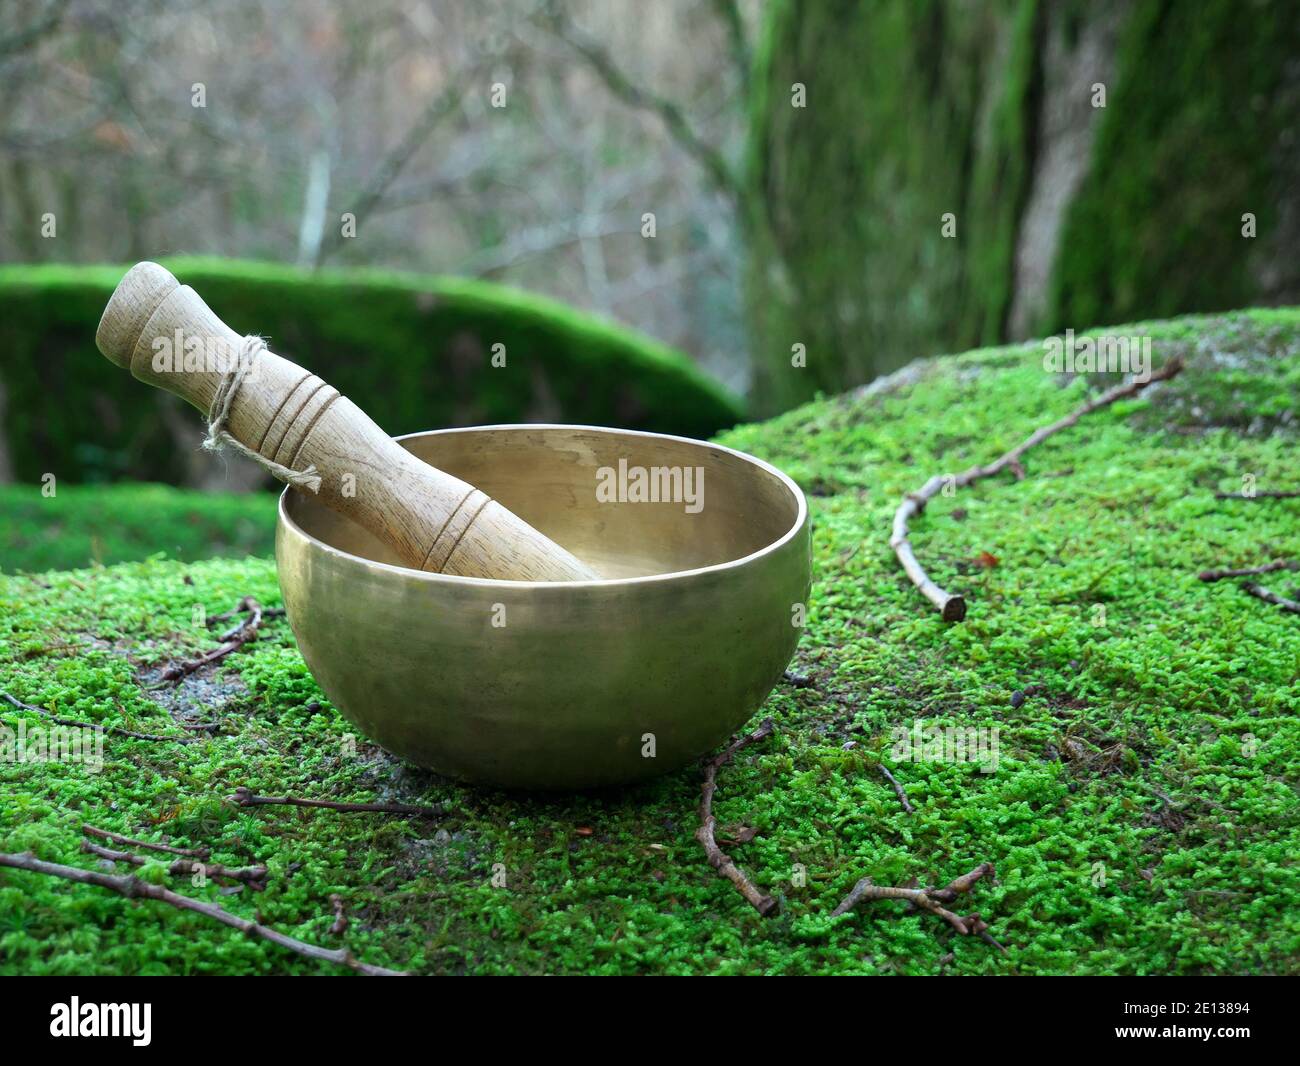 A singing bowl placed on the green moss in nature Stock Photo